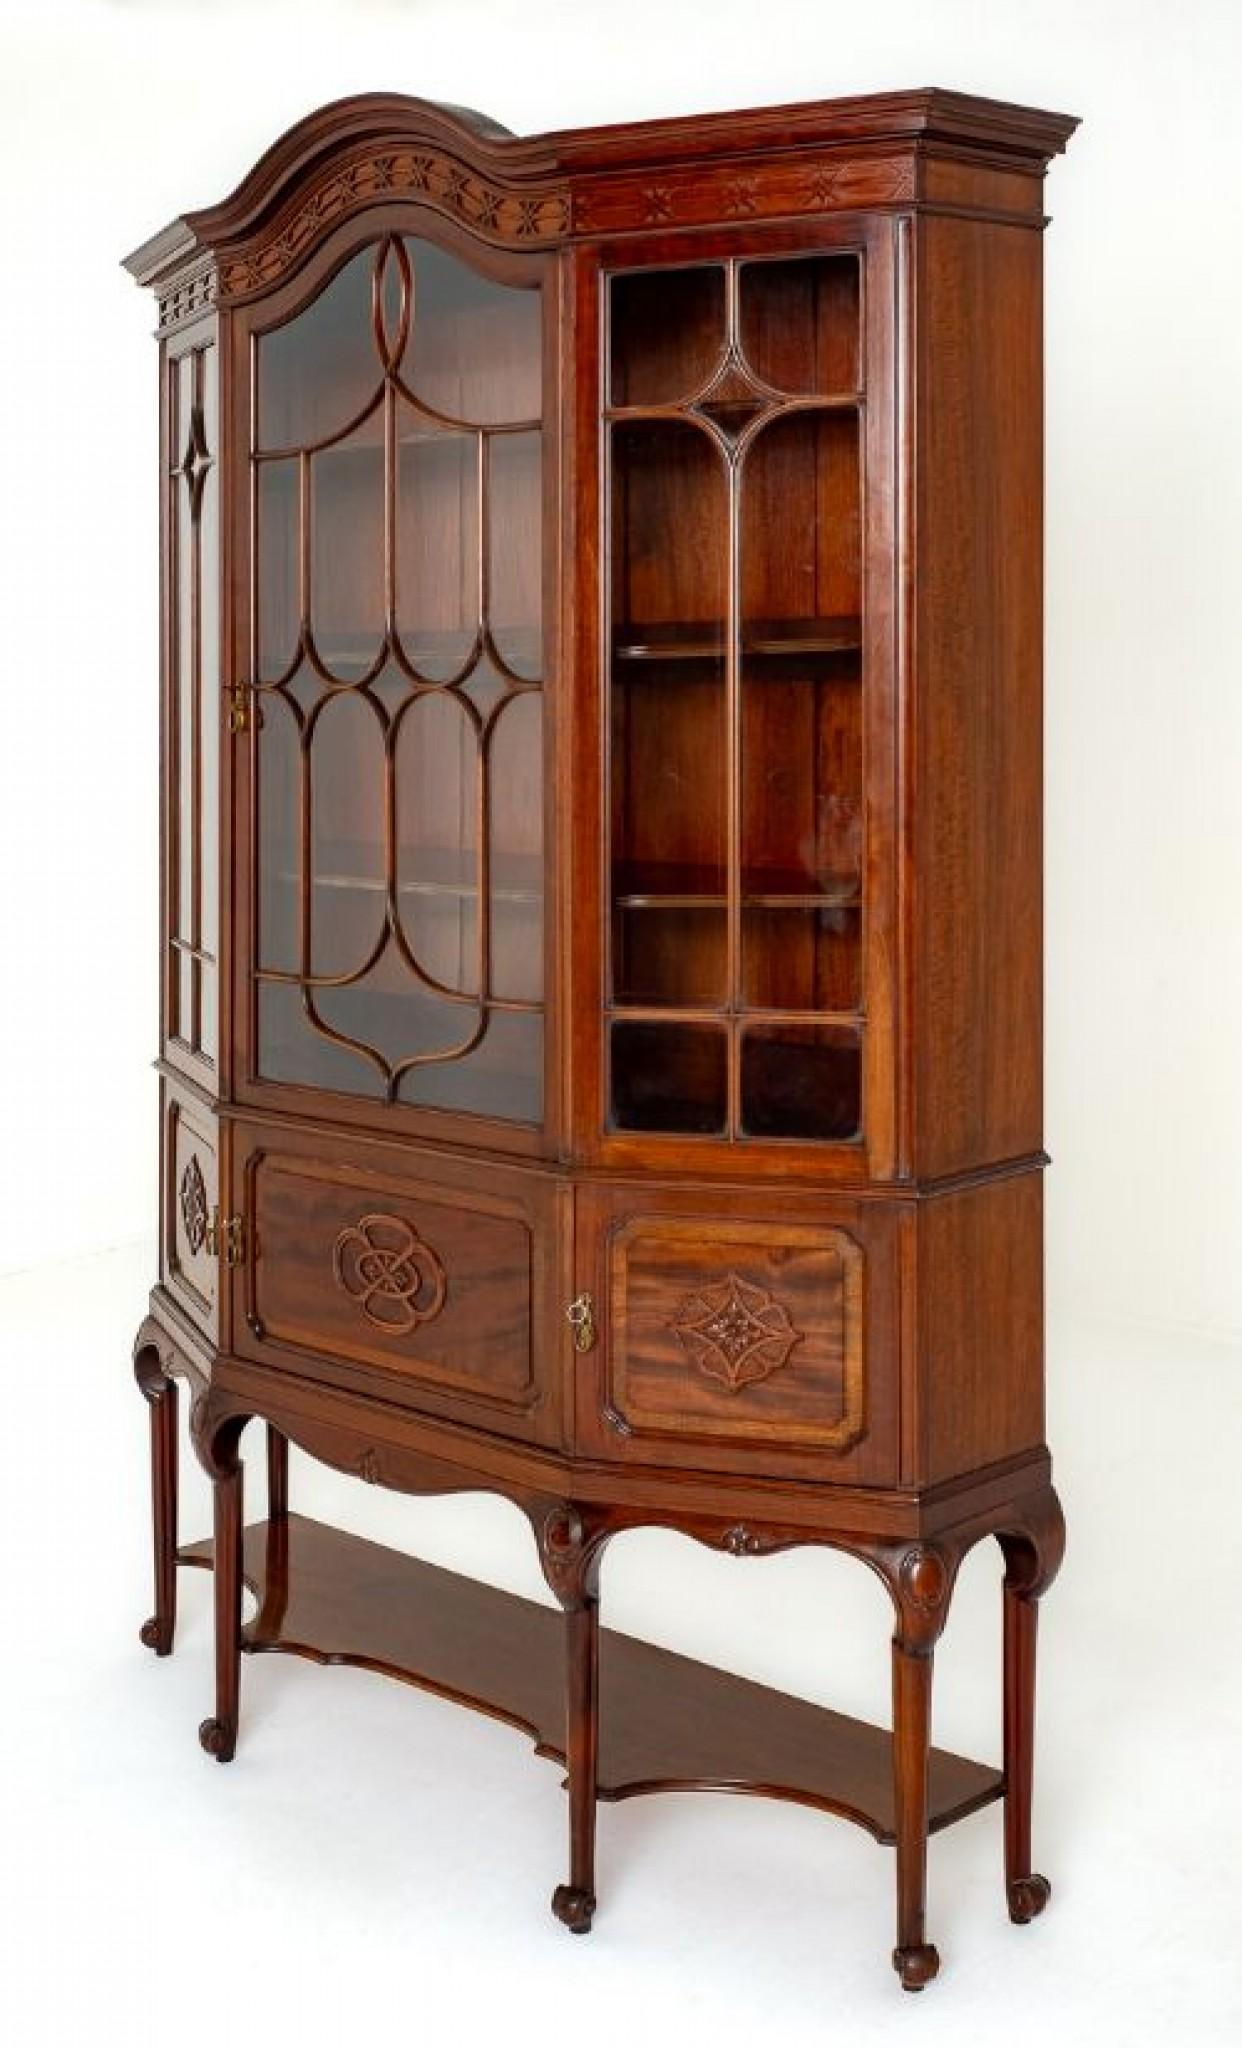 Good Quality Mahogany Display Cabinet.
Circa 1900
This Display Cabinet Stands Upon Shaped and Carved Legs with an Undertray.
The Lower Paneled Doors Featuring Blind Fret Work.
The Upper Glazed Section Having a Central Door Which Opens to Reveal 3